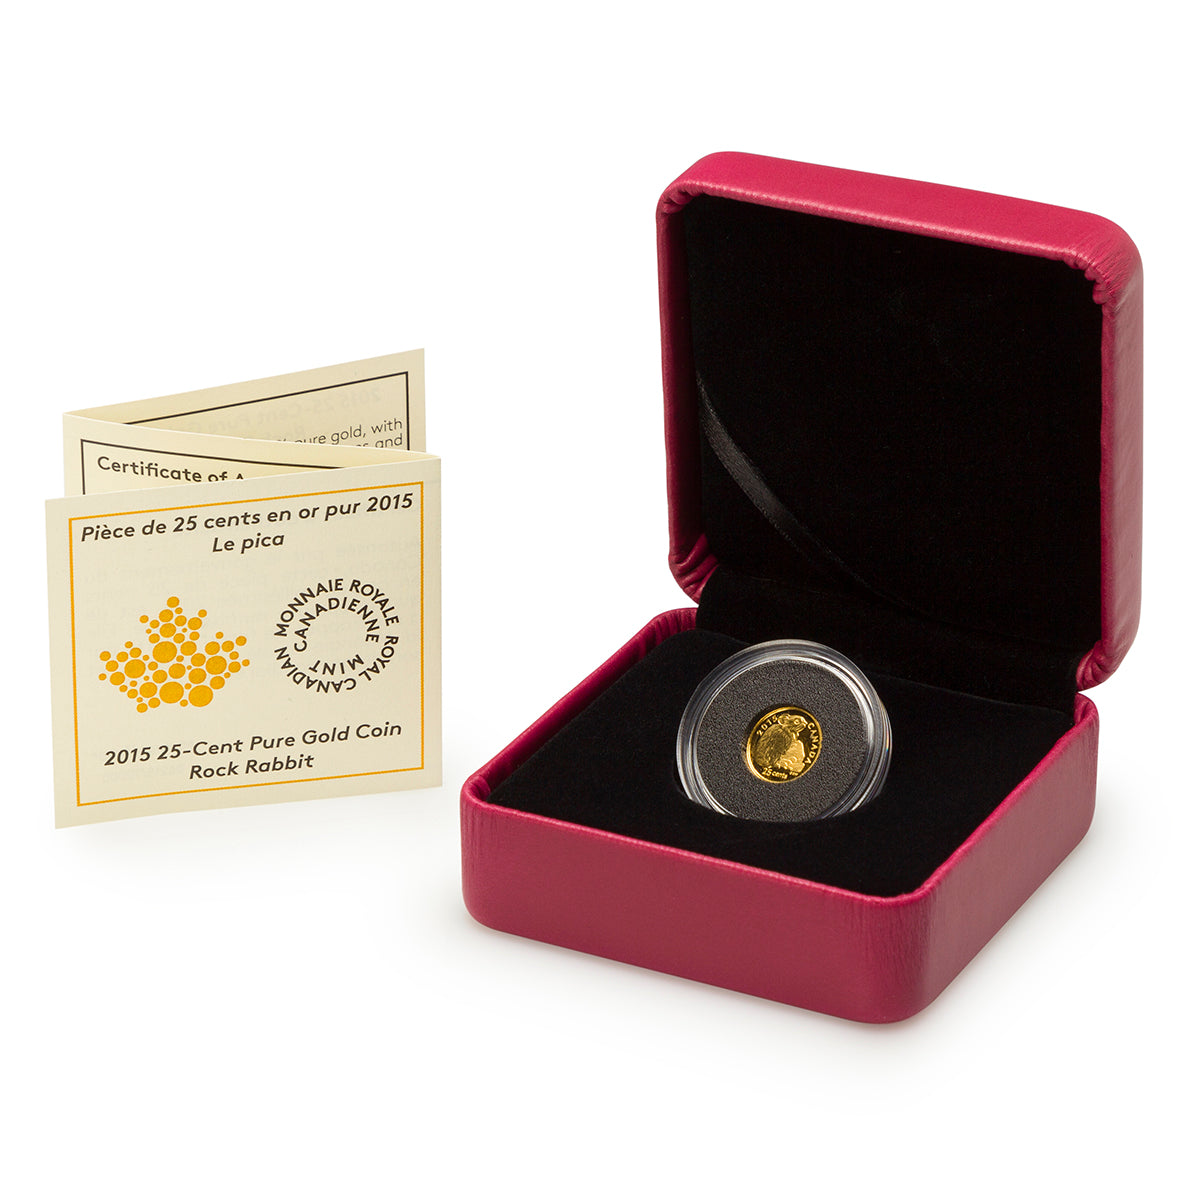 2015 25c Rock Rabbit - Pure Gold Coin